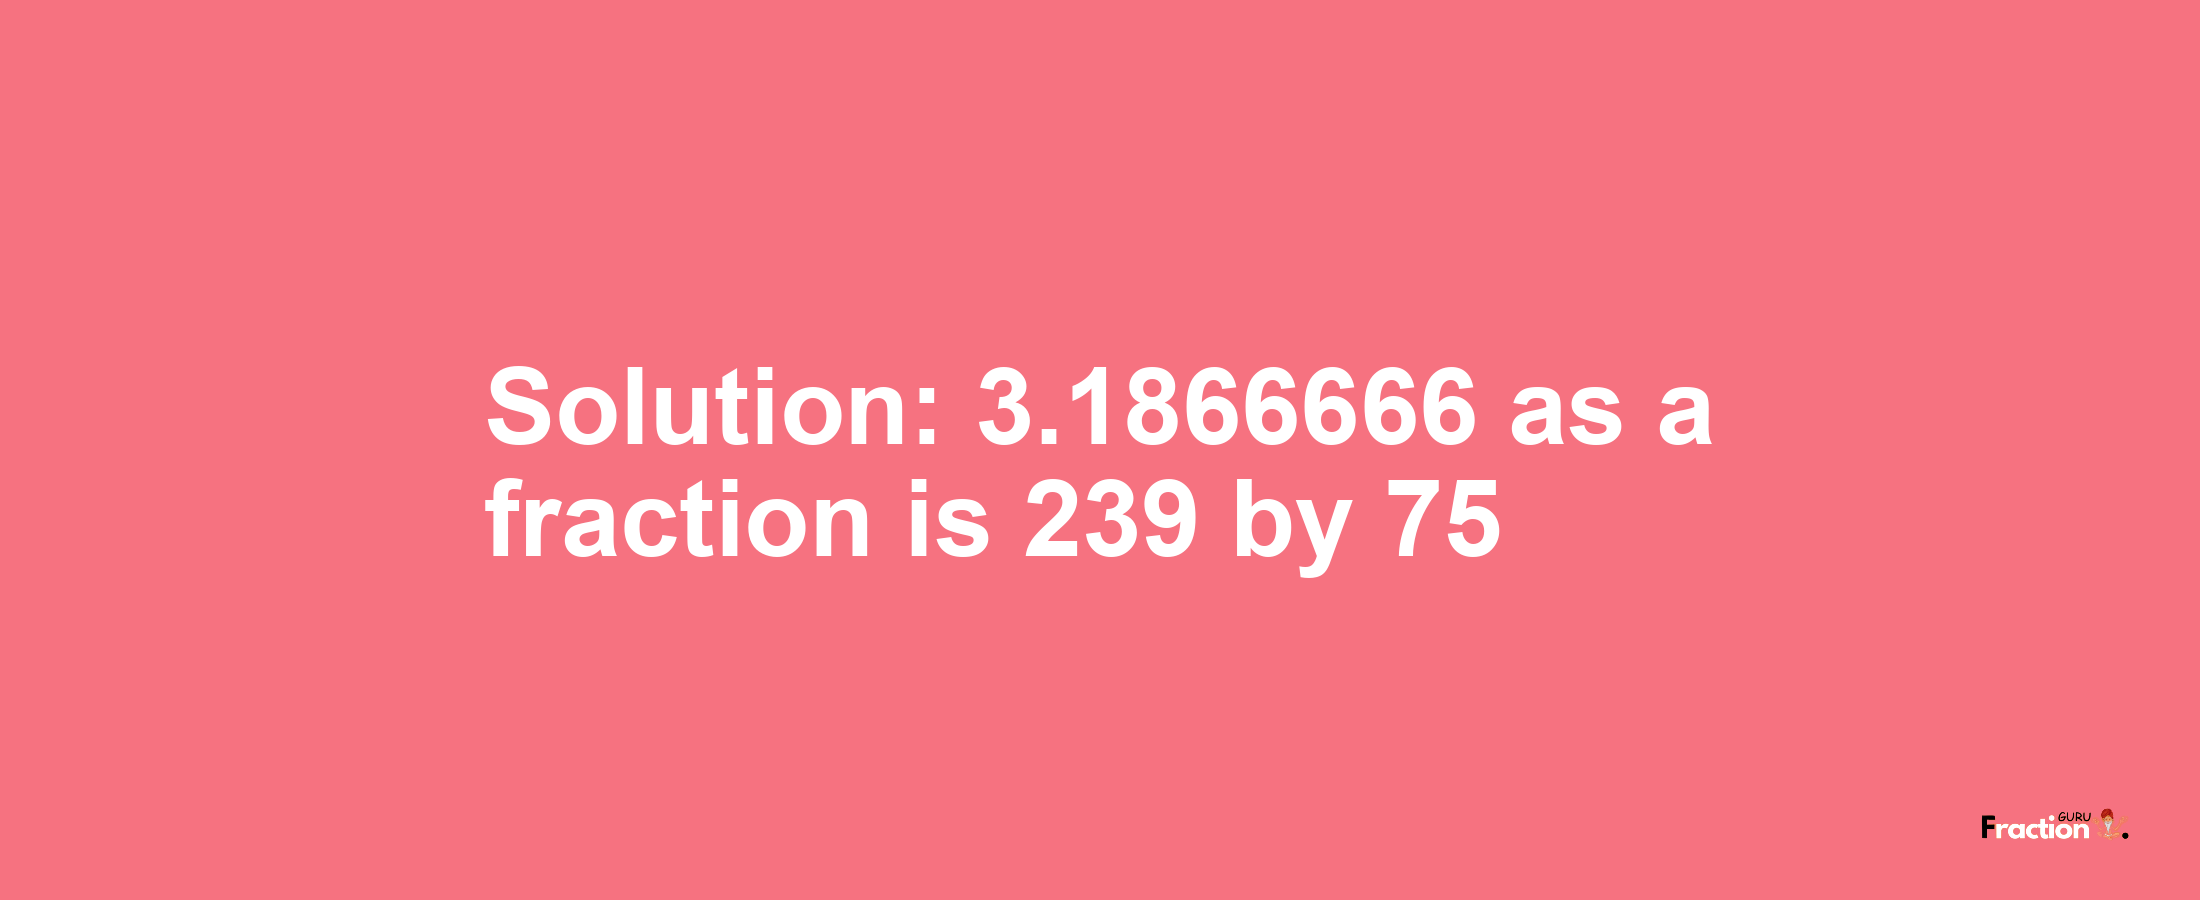 Solution:3.1866666 as a fraction is 239/75